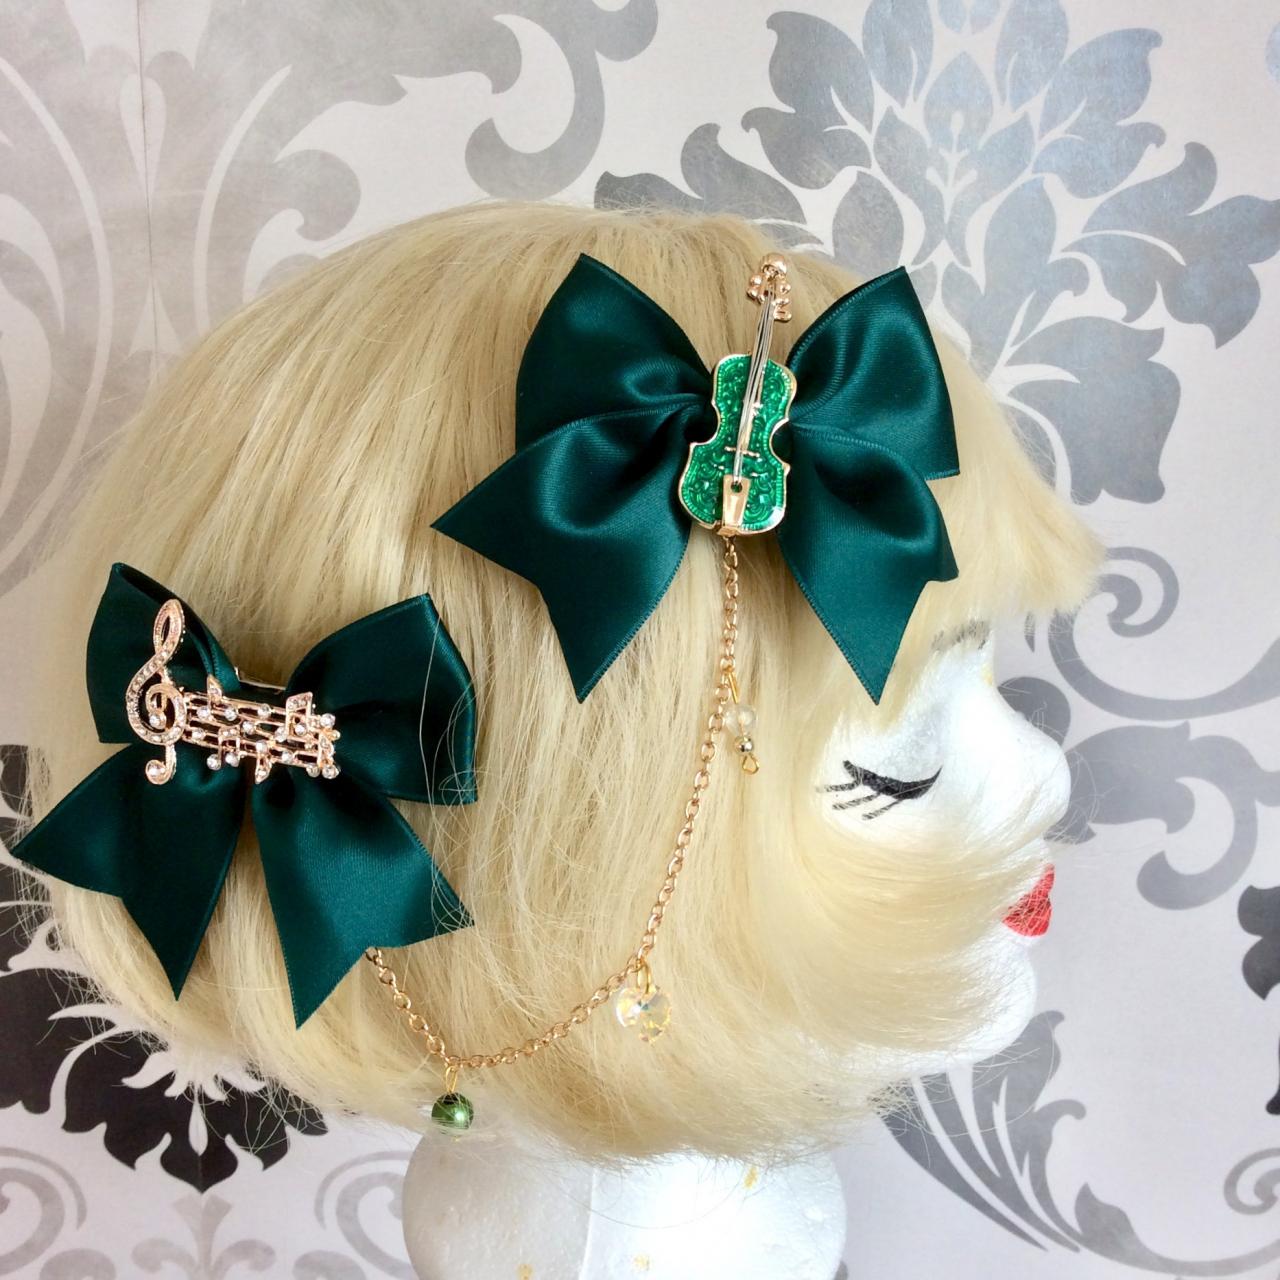 Pretty Satin Bows With Pearl Necklace, Brow Necklace Notes Violin Classic Lolita, Green, Hair Clip, Tiara, Headpiece, Gold,pearls,rhinestone